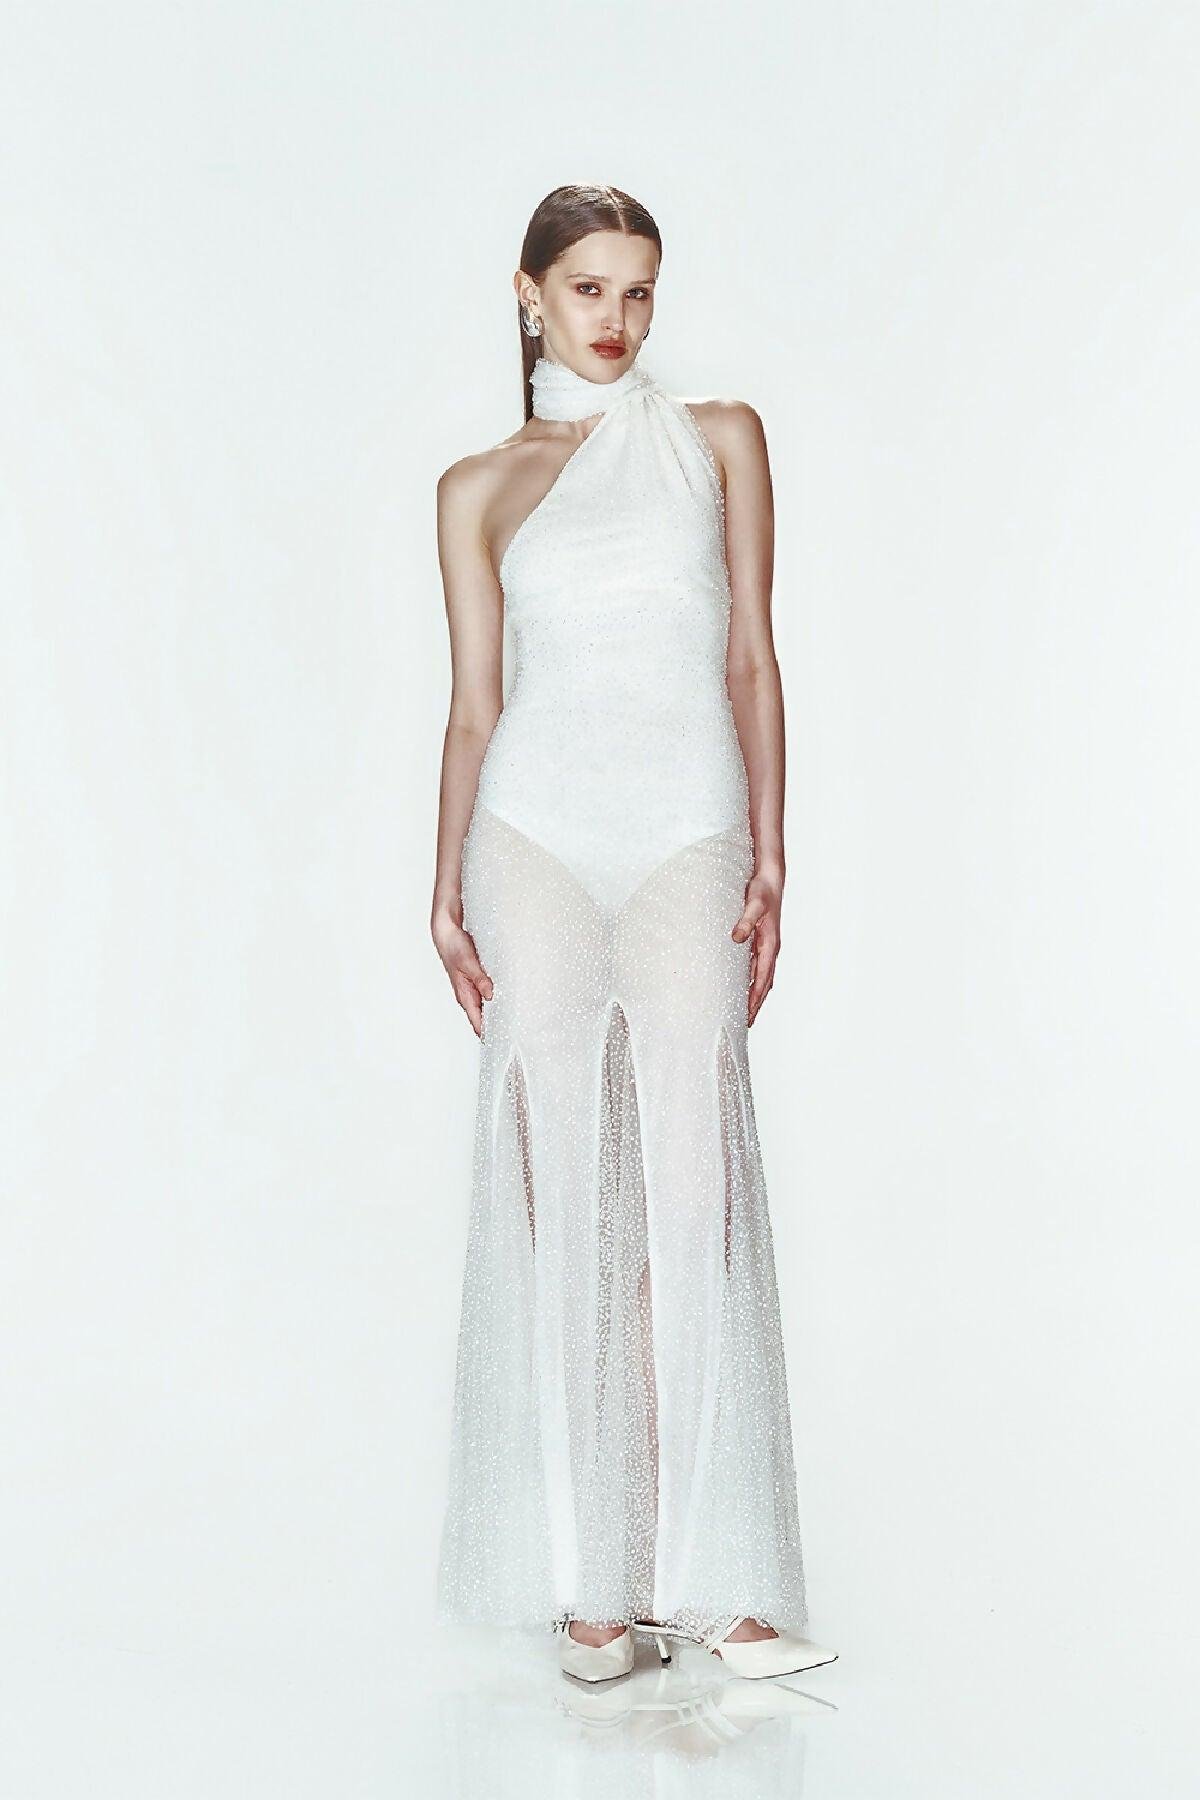 CHAMPAGNE CHIC GOWN by KHELA THE LABEL